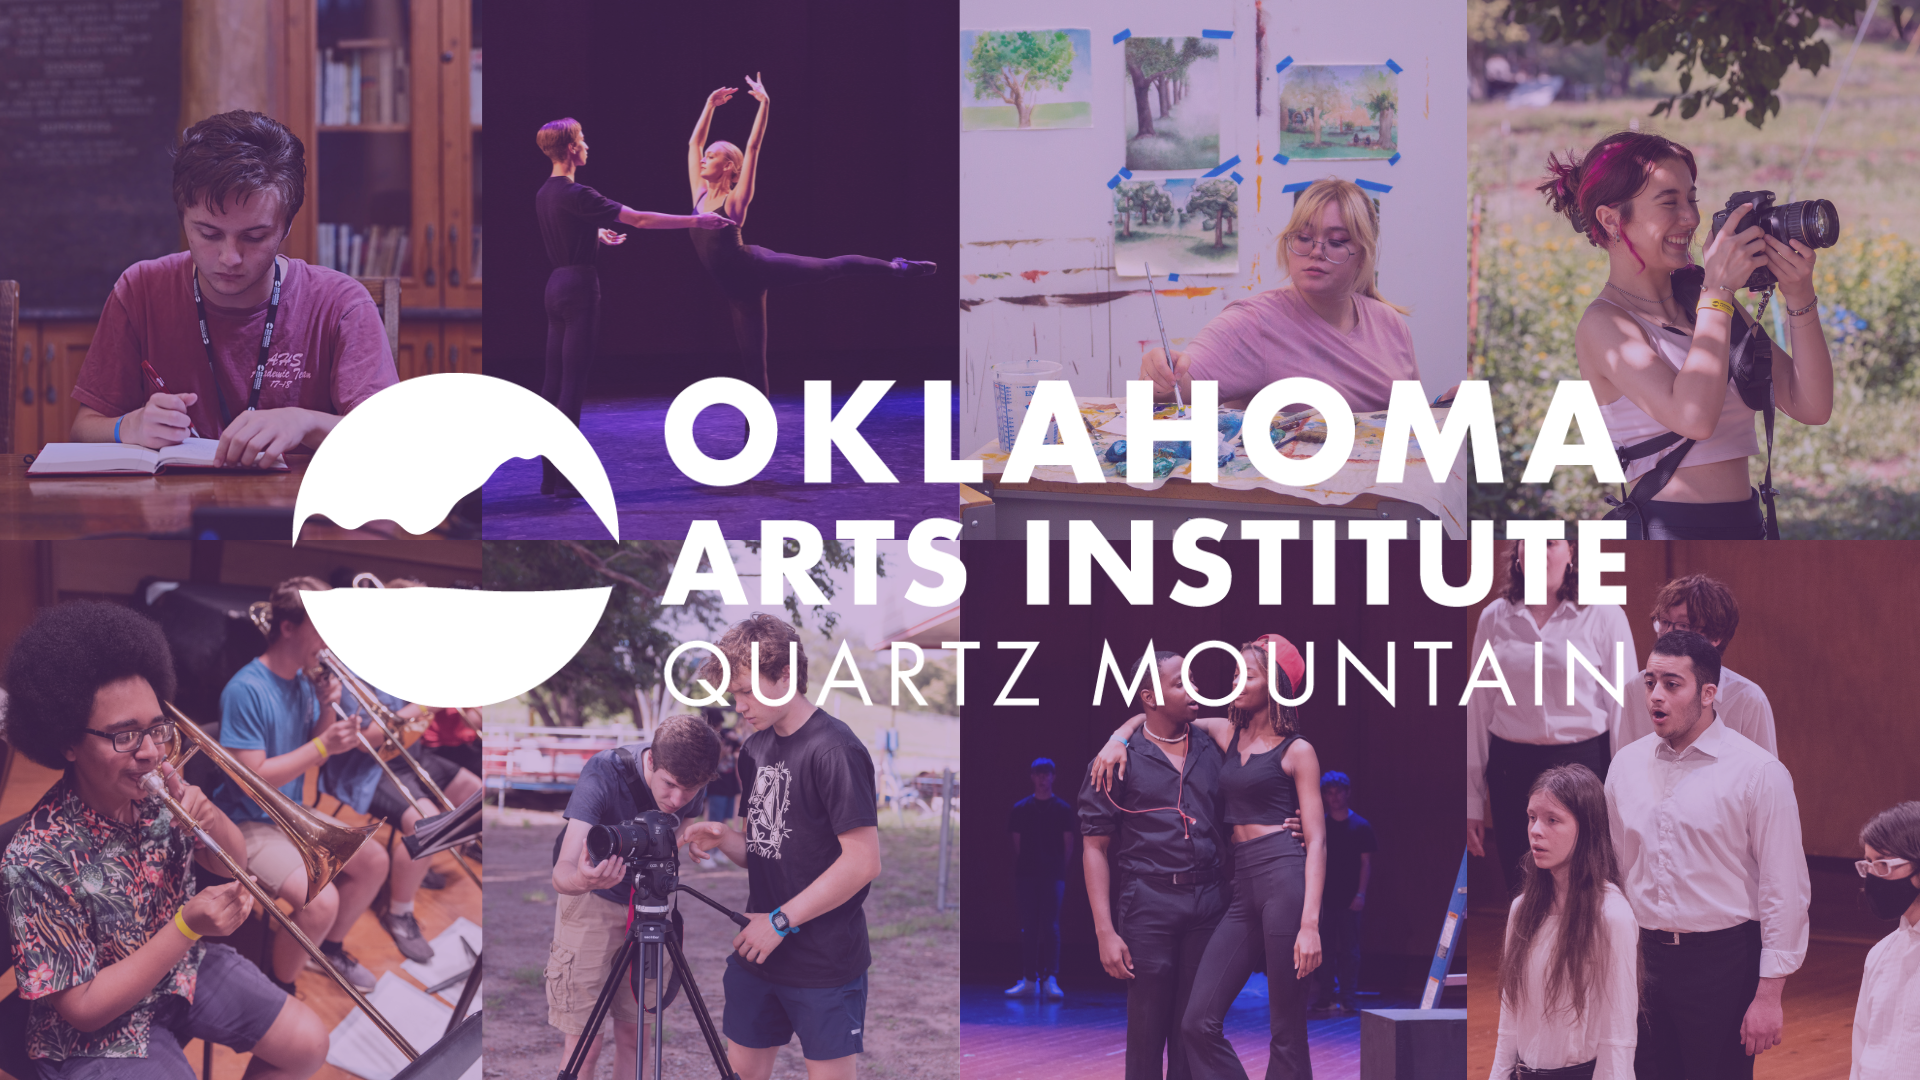 People engaged in various artistic pursuits, including writing, dance, painting, photography, orchestra, acting, and singing are shown. Oklahoma Arts Institute Quartz Mountain is written in white over the image.